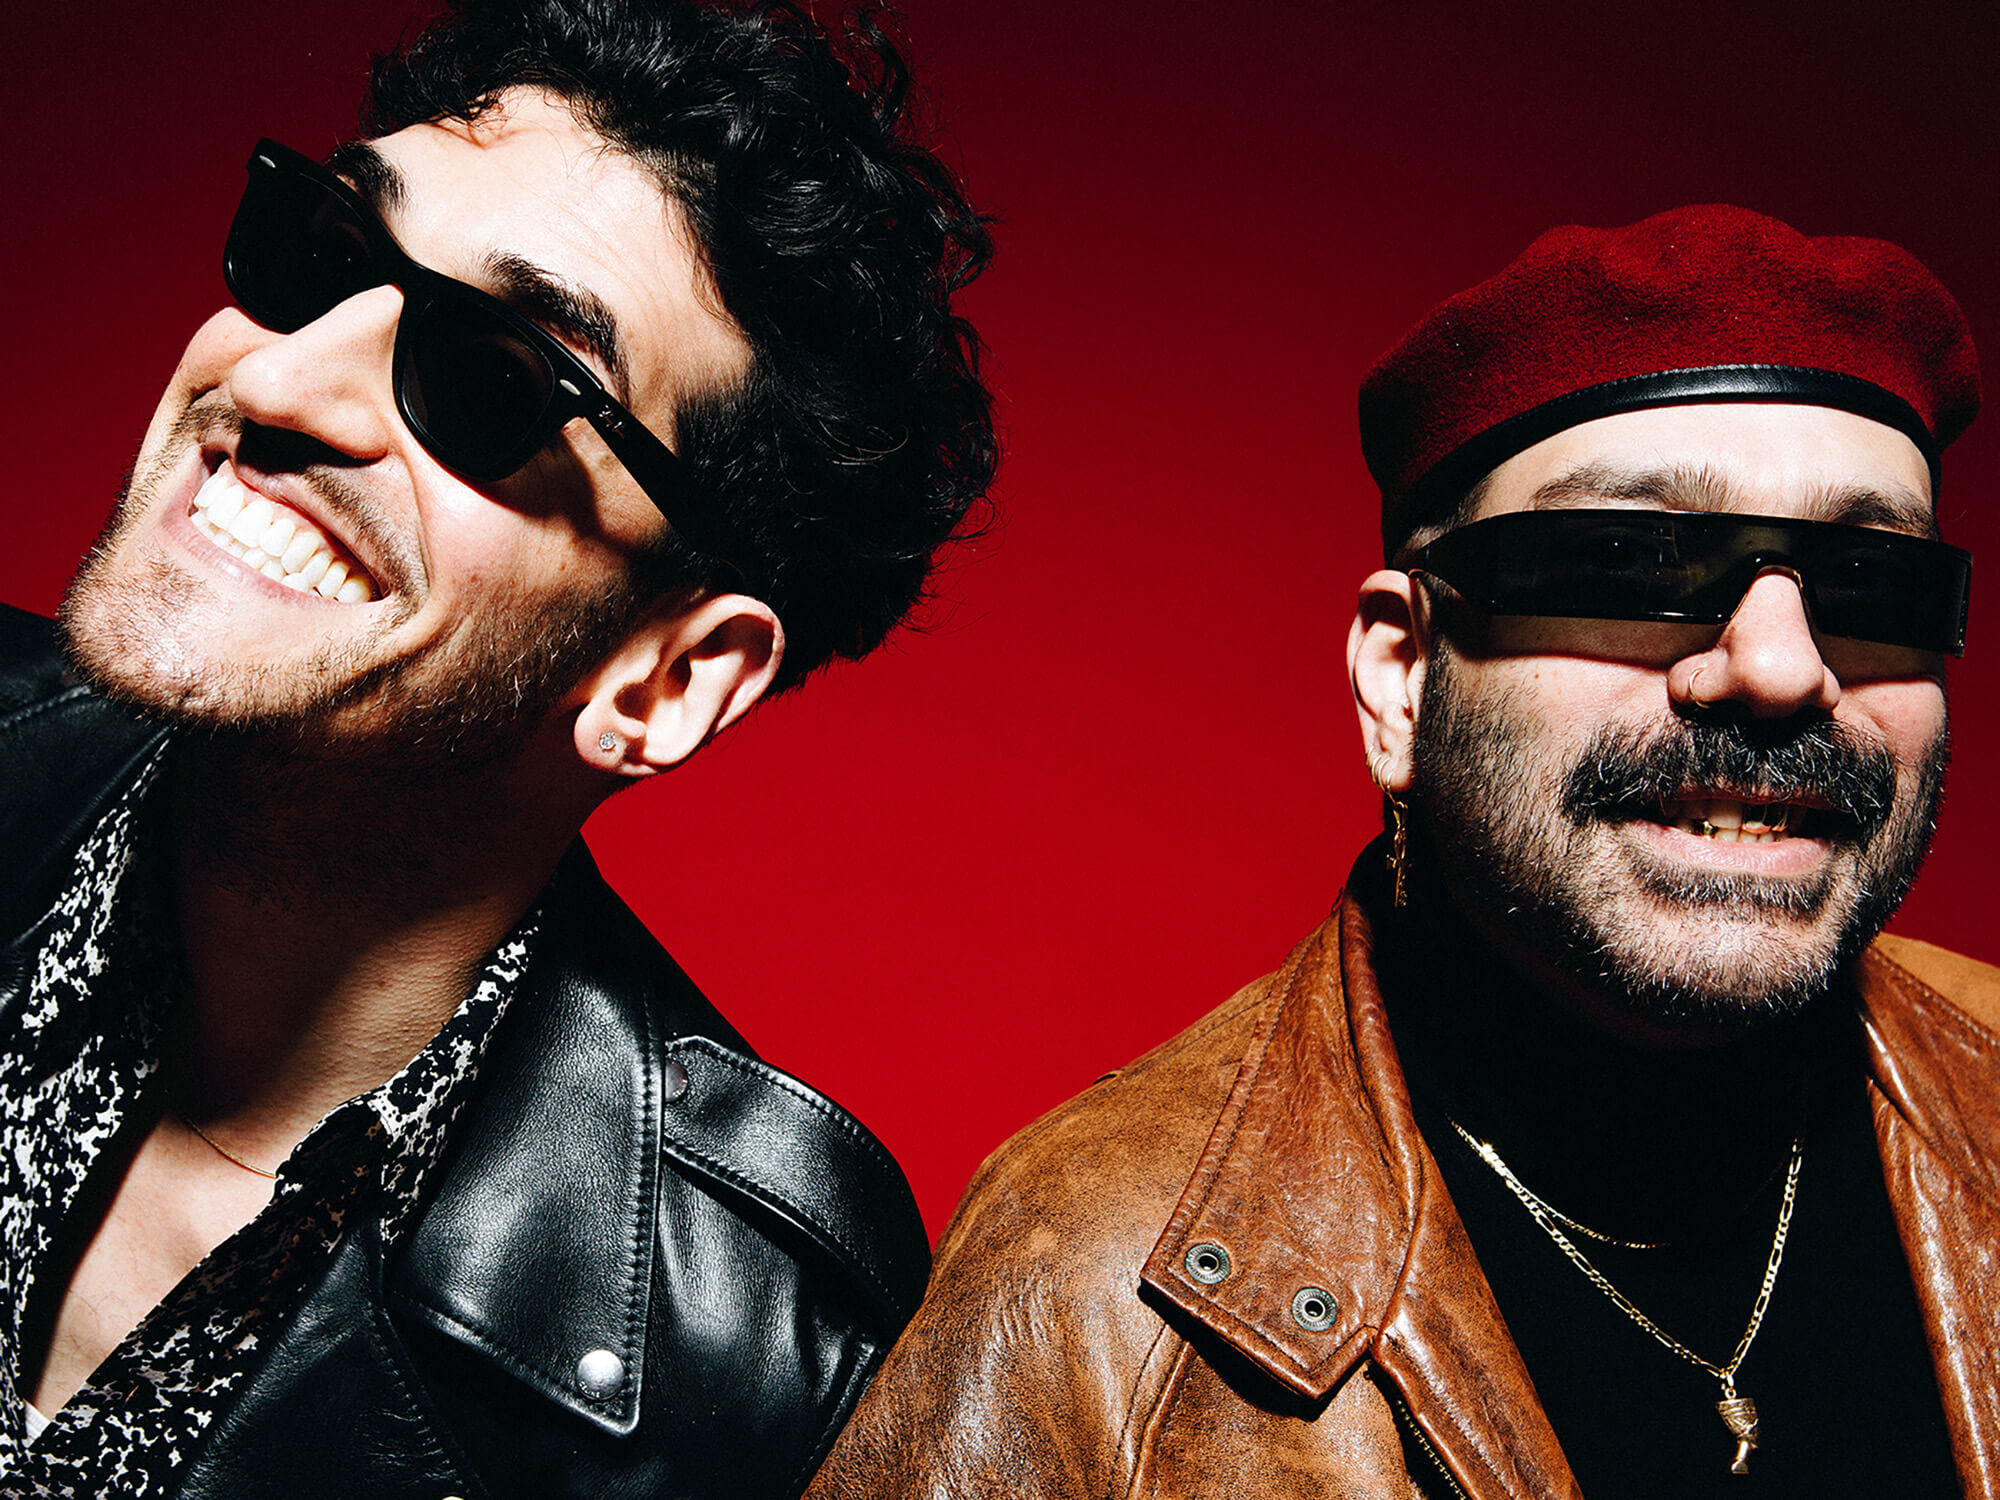 Dave 1 and P-Thugg of Chromeo, photo by Fiona Garden